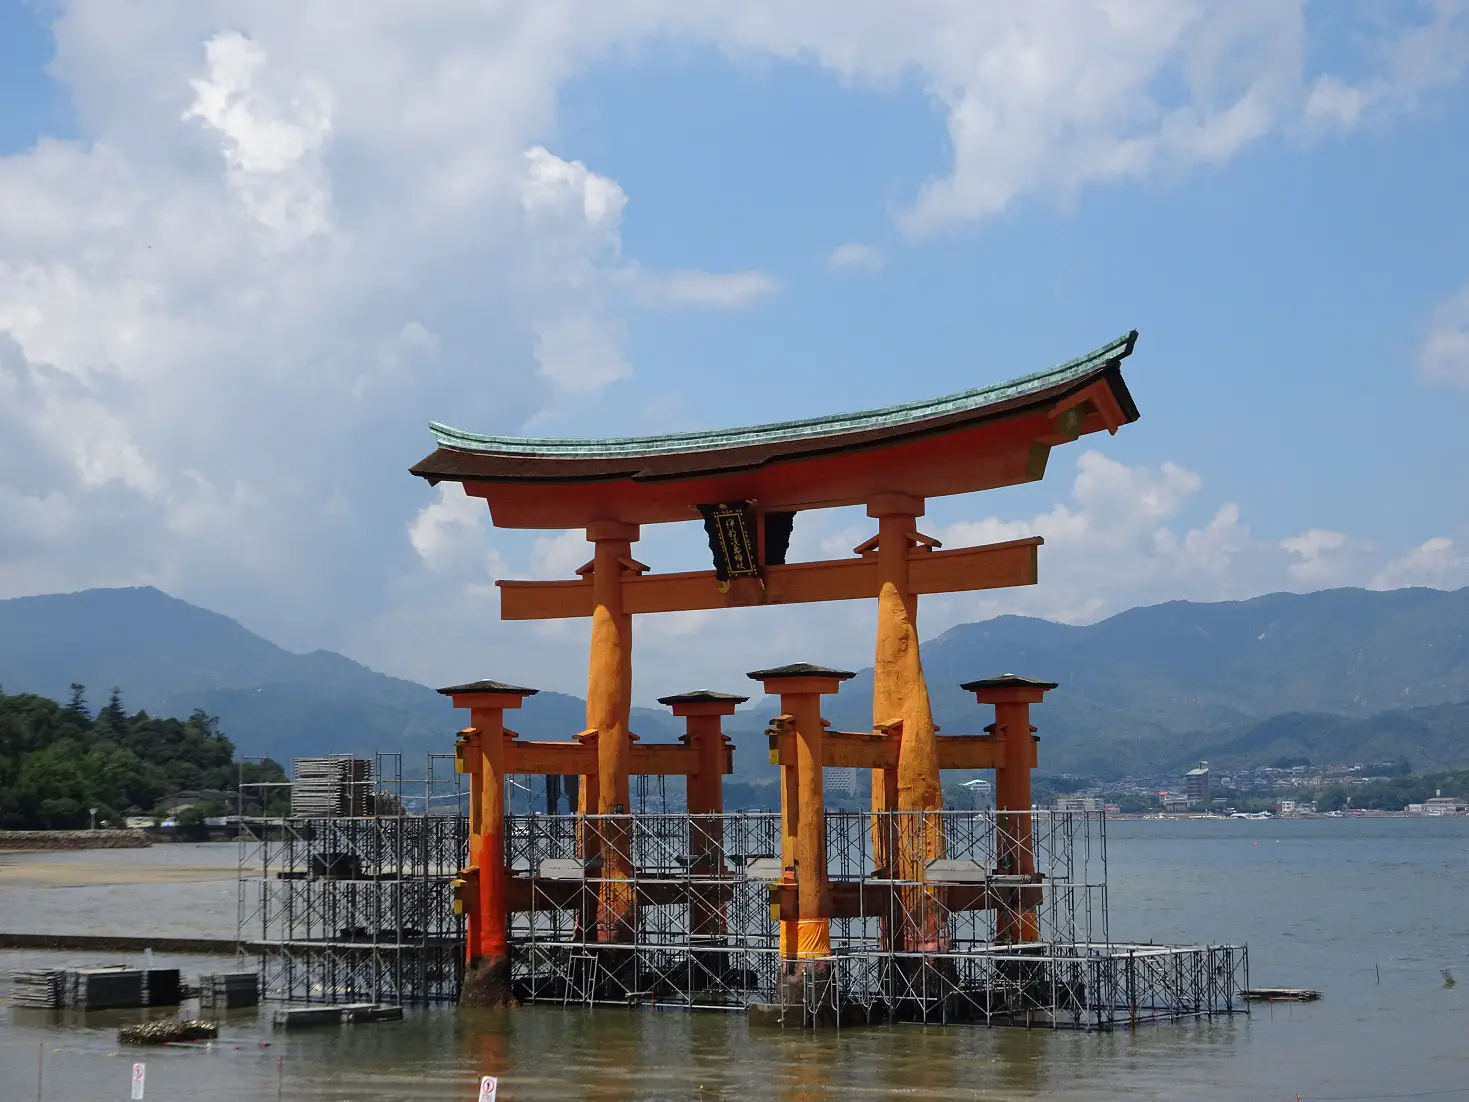 The red wooden torii of Itsukushima Shrine standing in the water in front of Miyajima Island, Japan